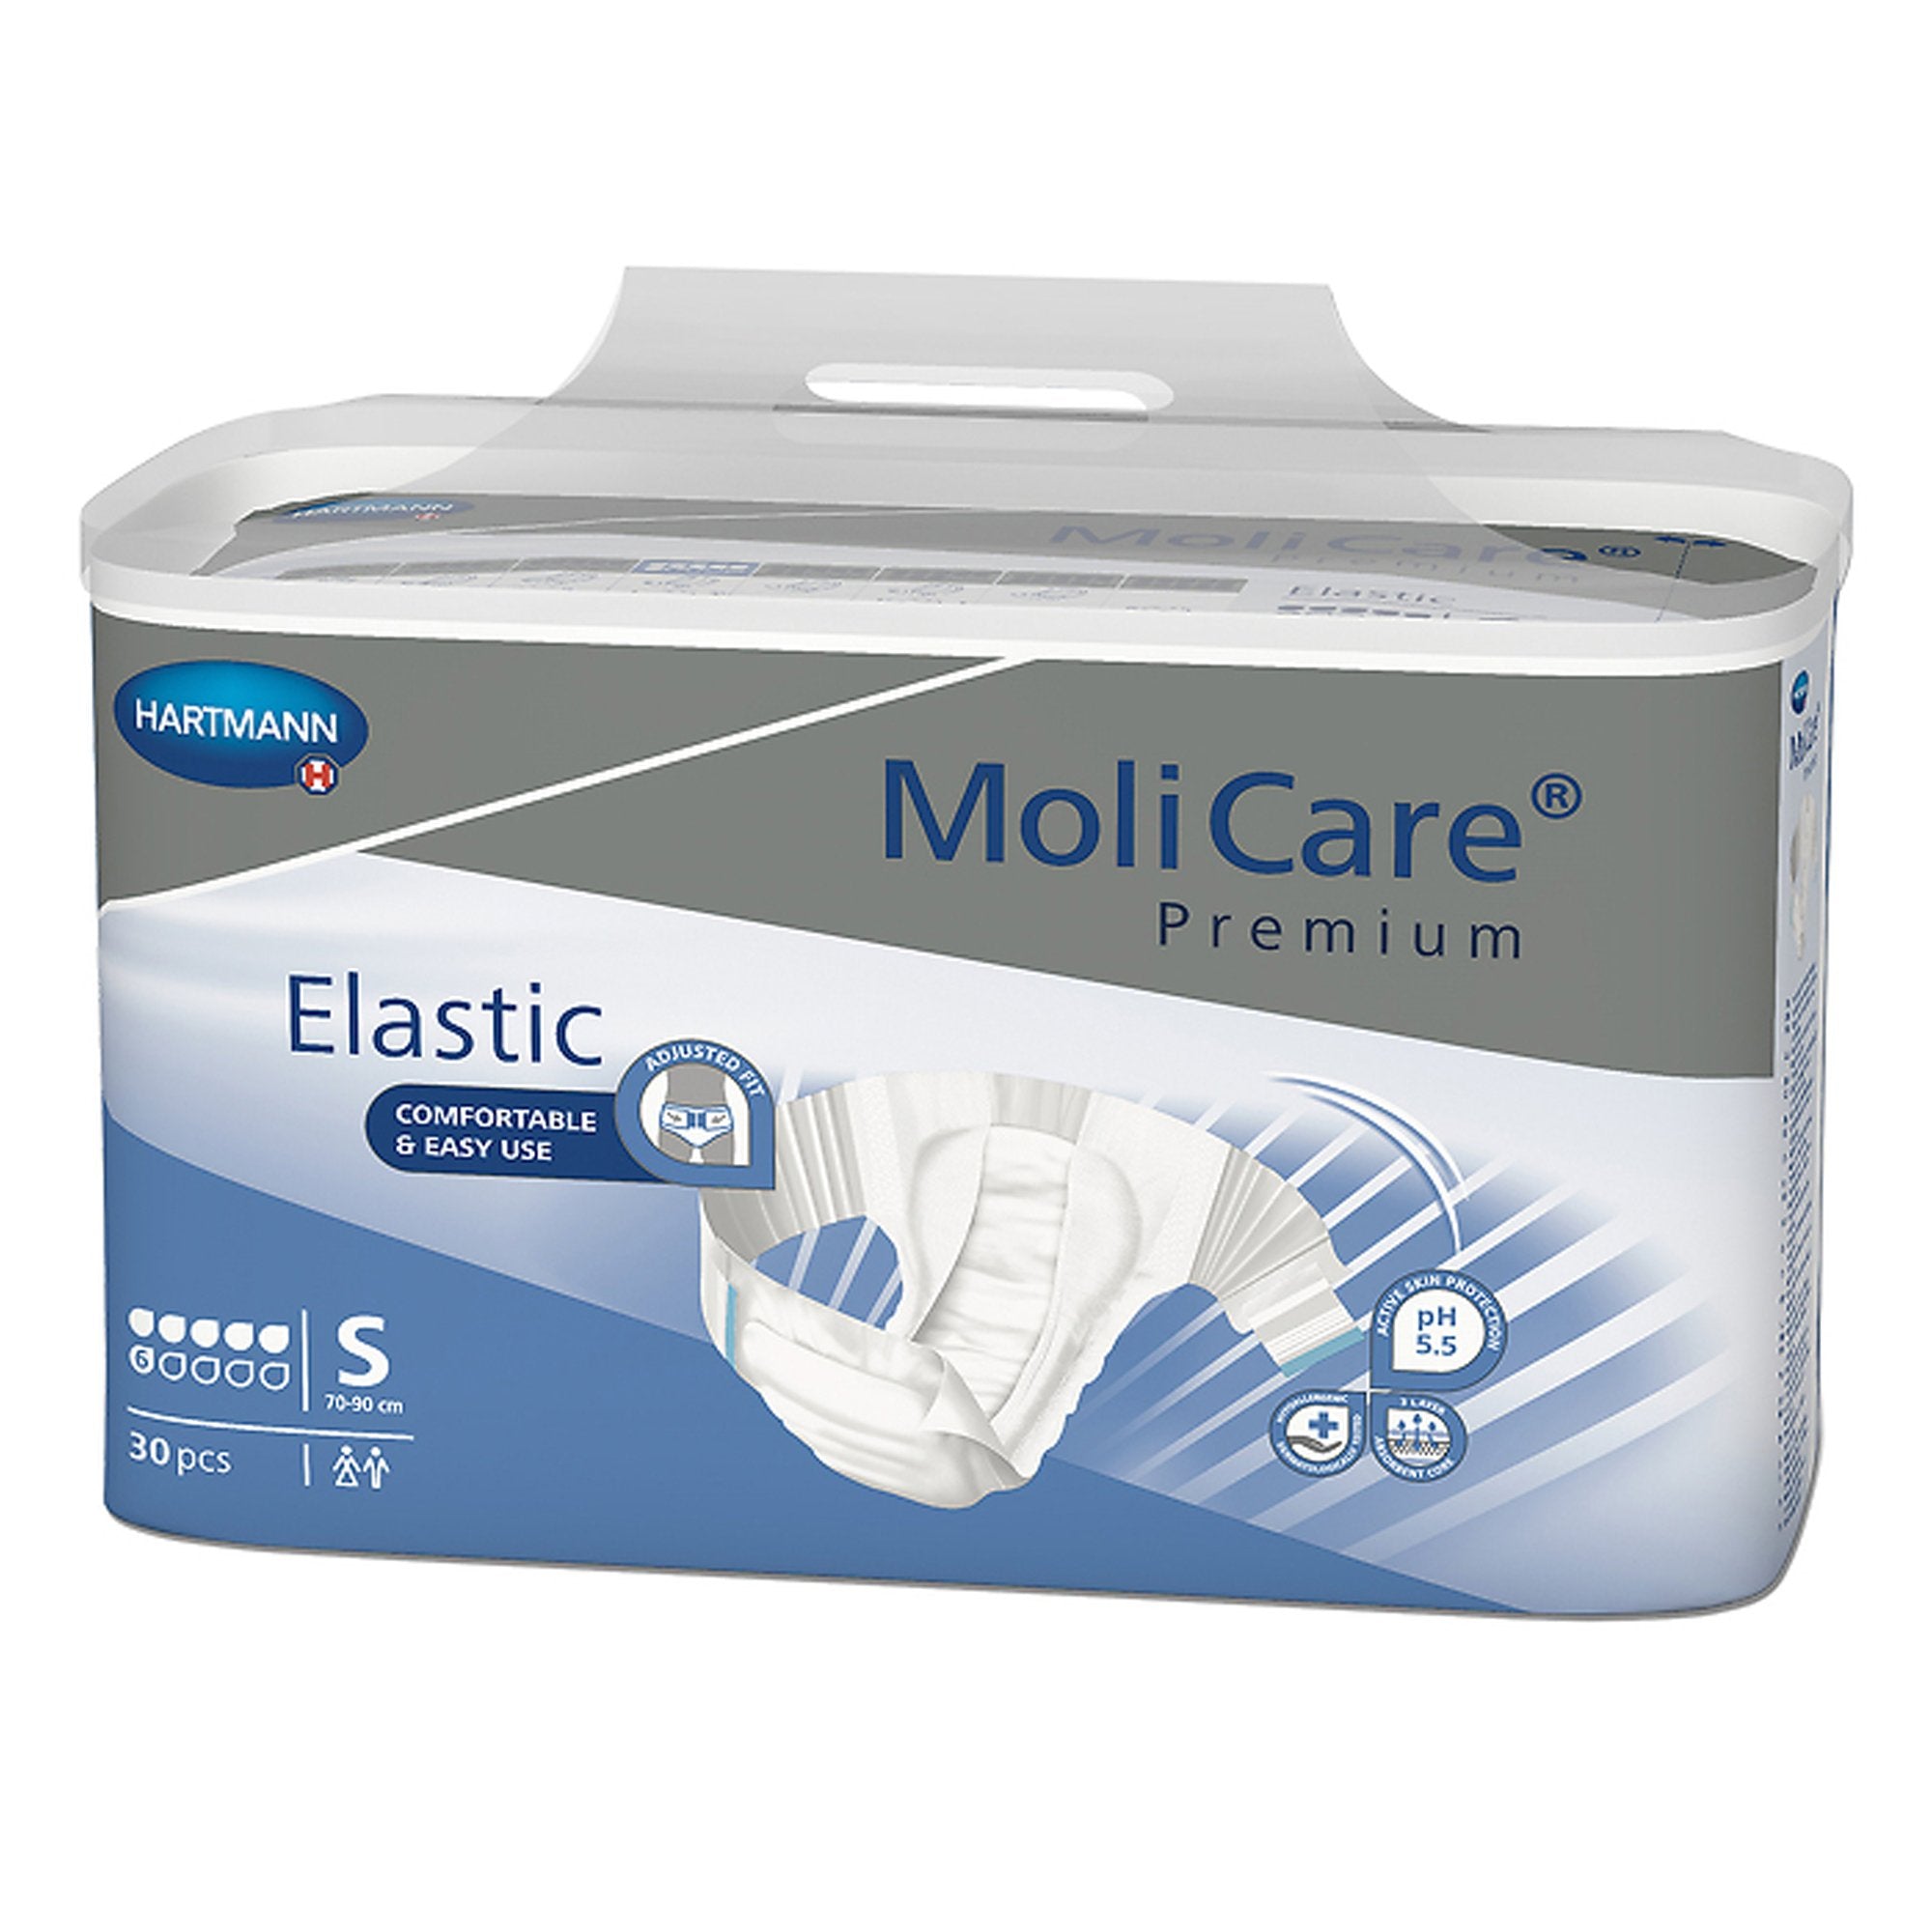 Unisex Adult Incontinence Brief MoliCare® Premium Elastic 6D Small Disposable Moderate Absorbency